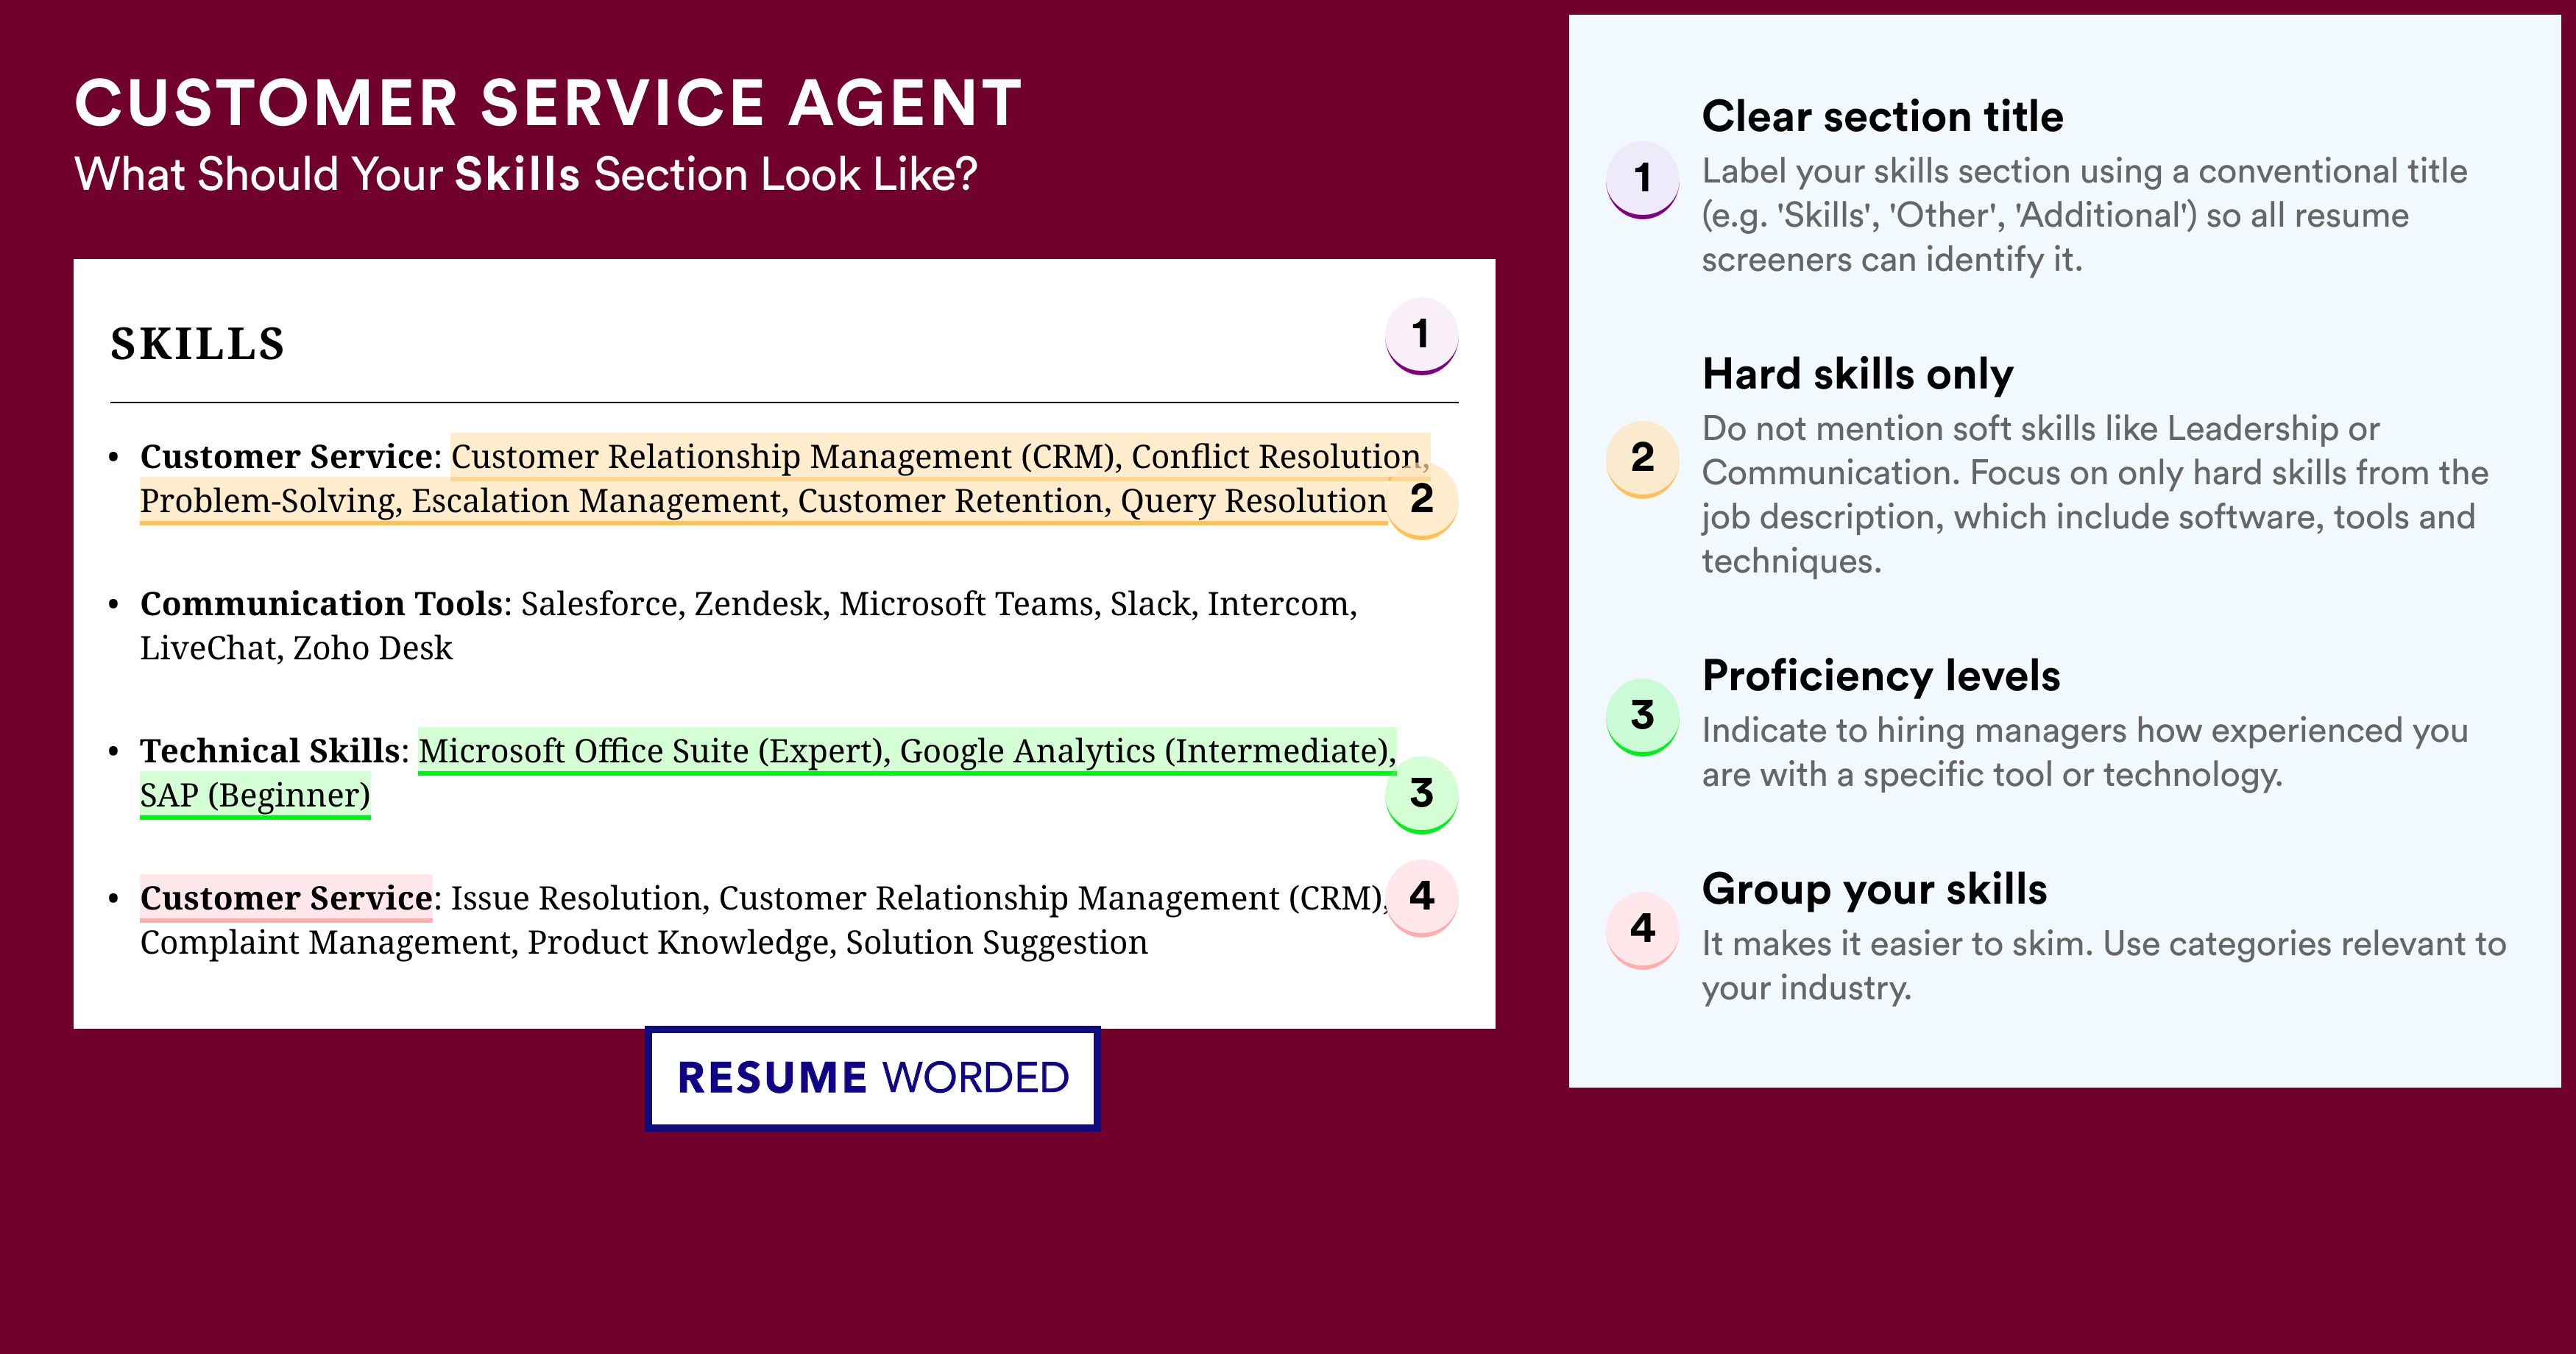 How To Write Your Skills Section - Customer Service Agent Roles